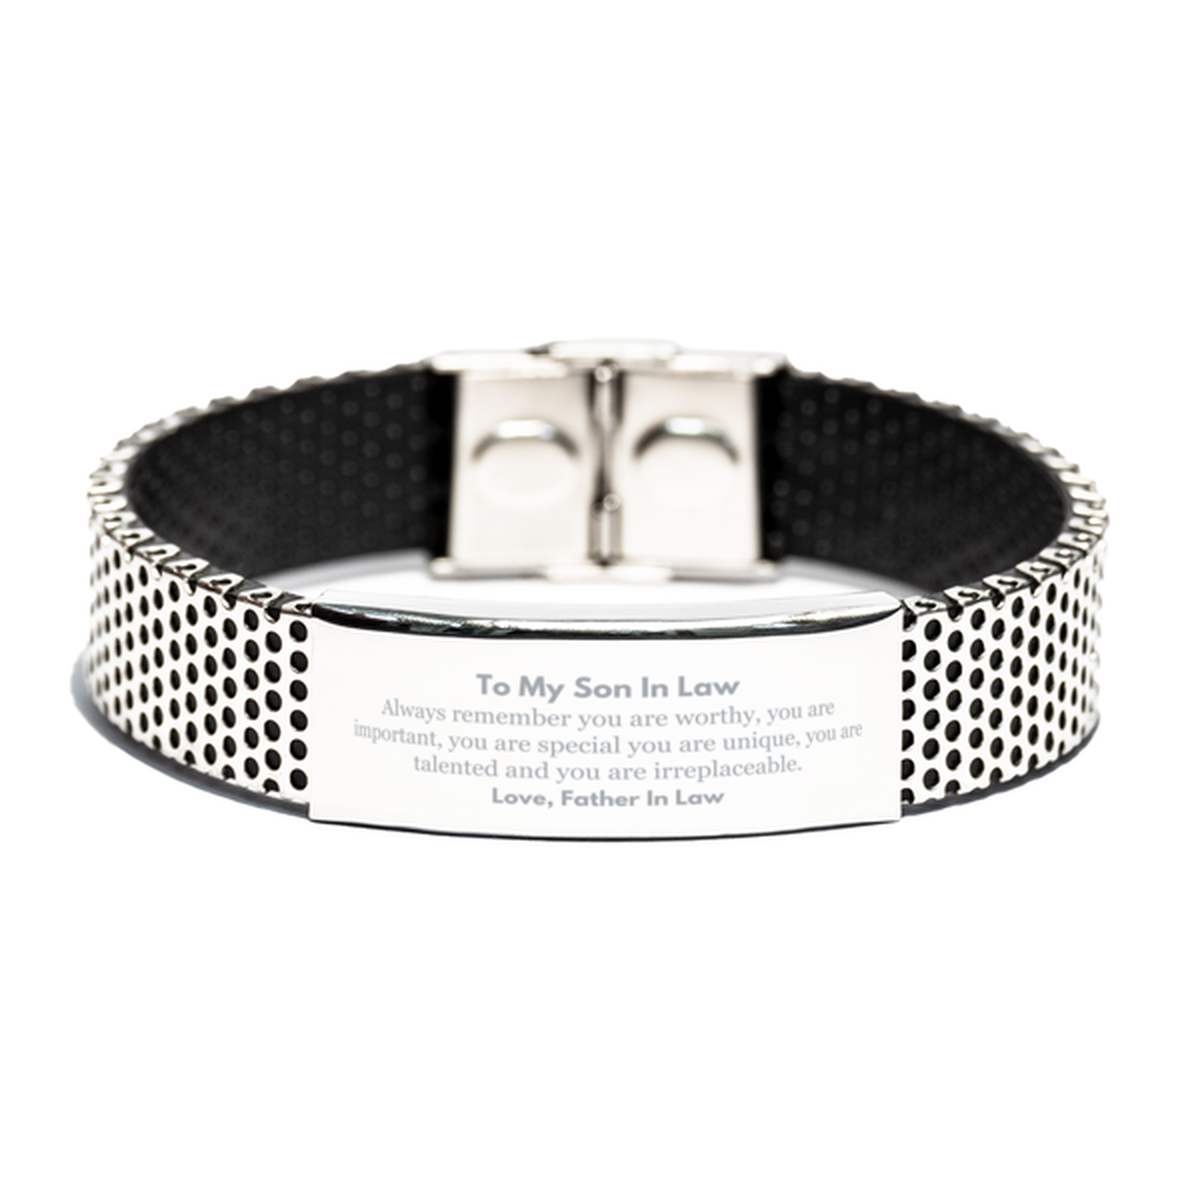 Son In Law Birthday Gifts from Father In Law, Inspirational Stainless Steel Bracelet for Son In Law Christmas Graduation Gifts for Son In Law Always remember you are worthy, you are important. Love, Father In Law